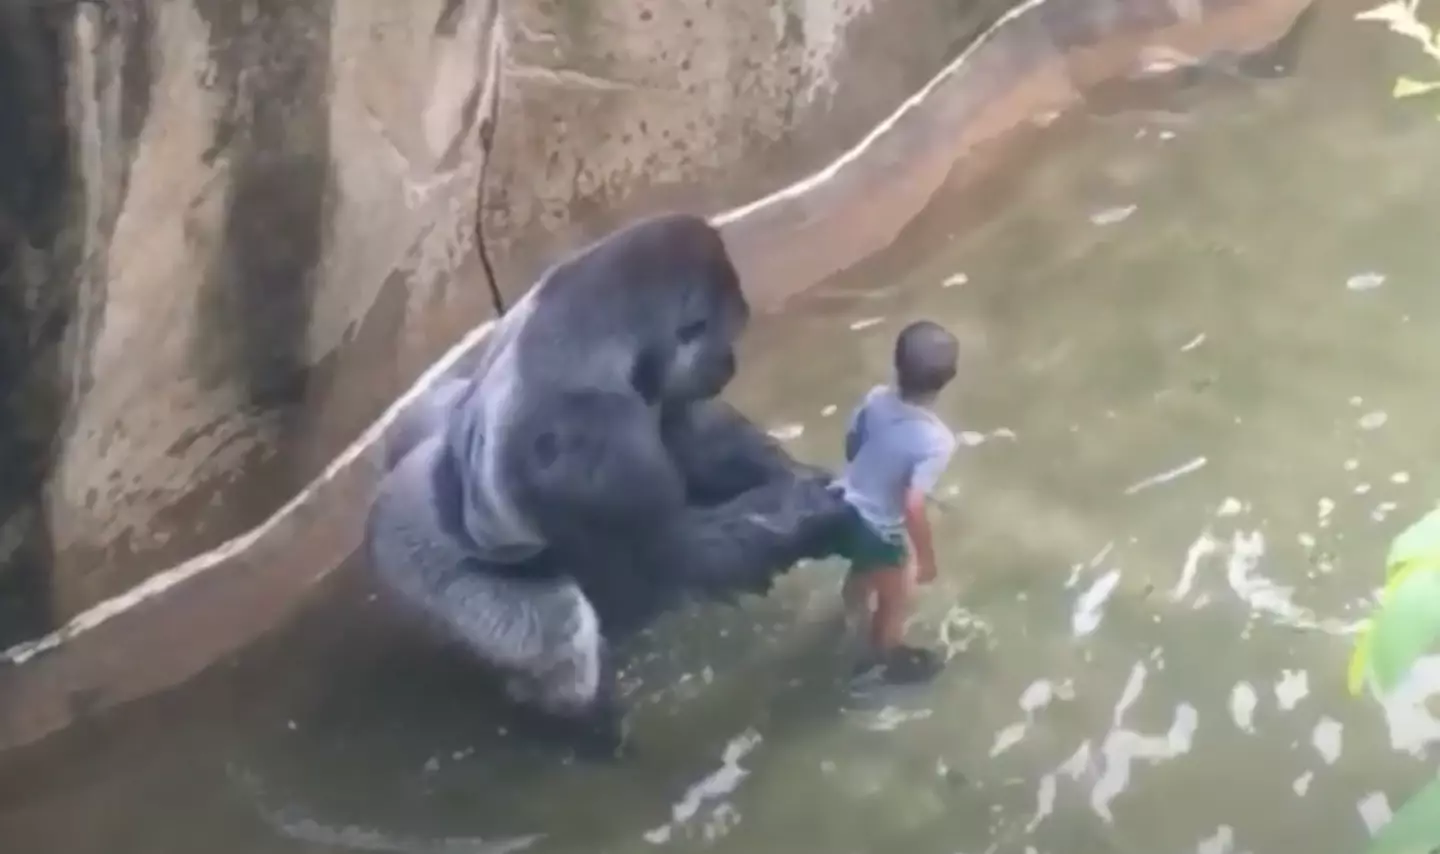 Harambe was shot after a boy managed to get into his enclosure.